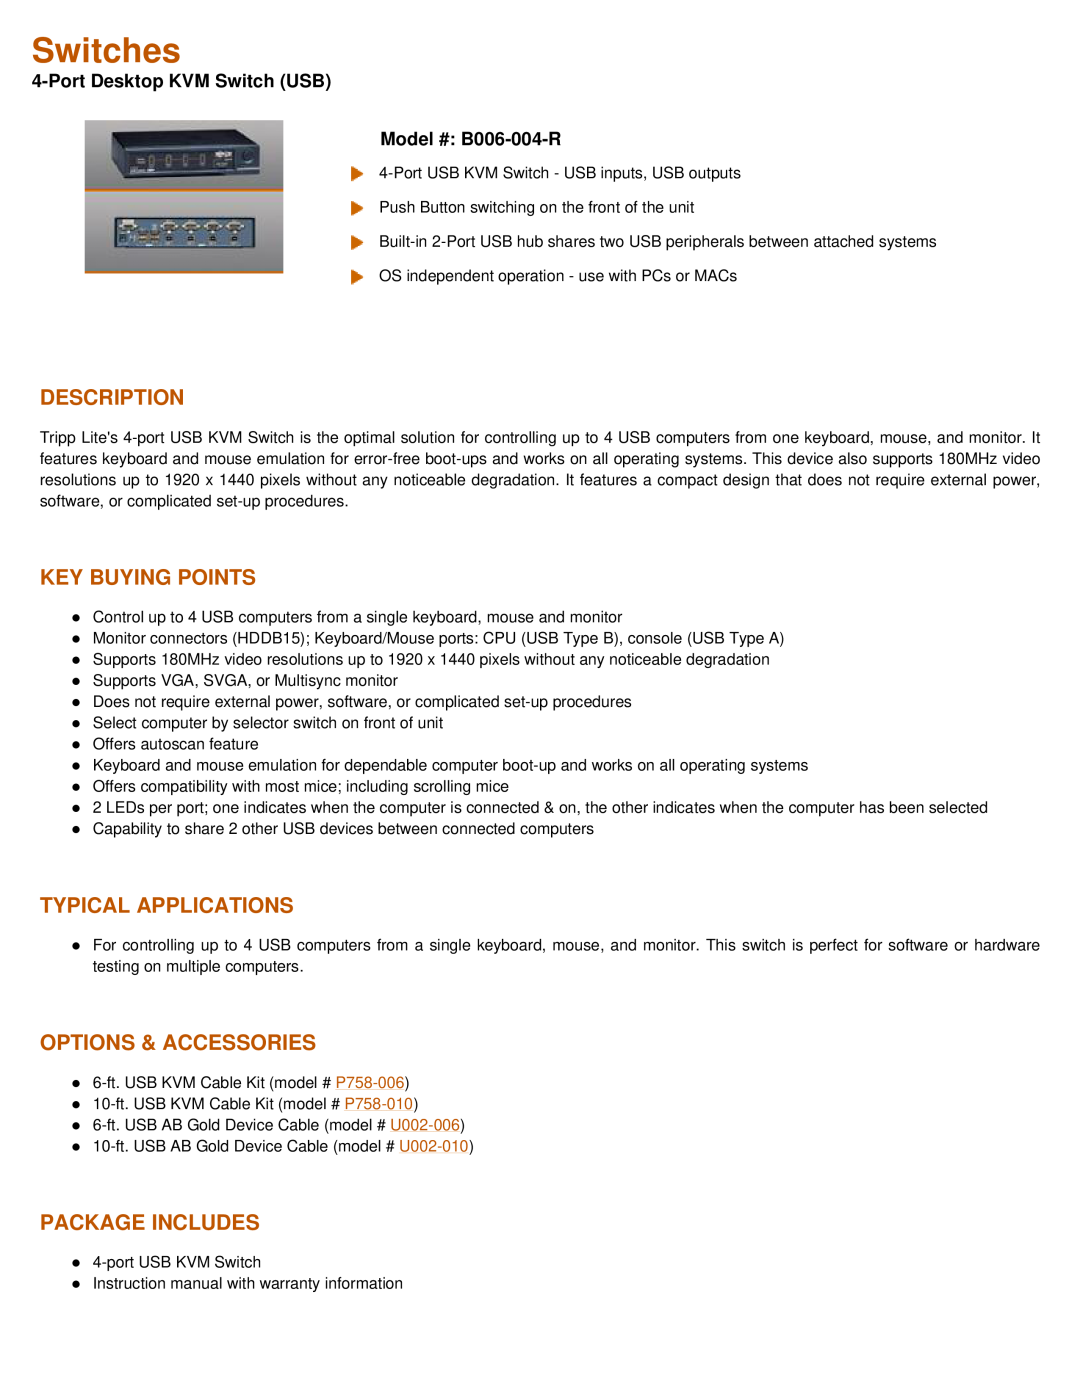 Tripp Lite B006-004-R instruction manual Description, Key Buying Points, Typical Applications, Options & Accessories 